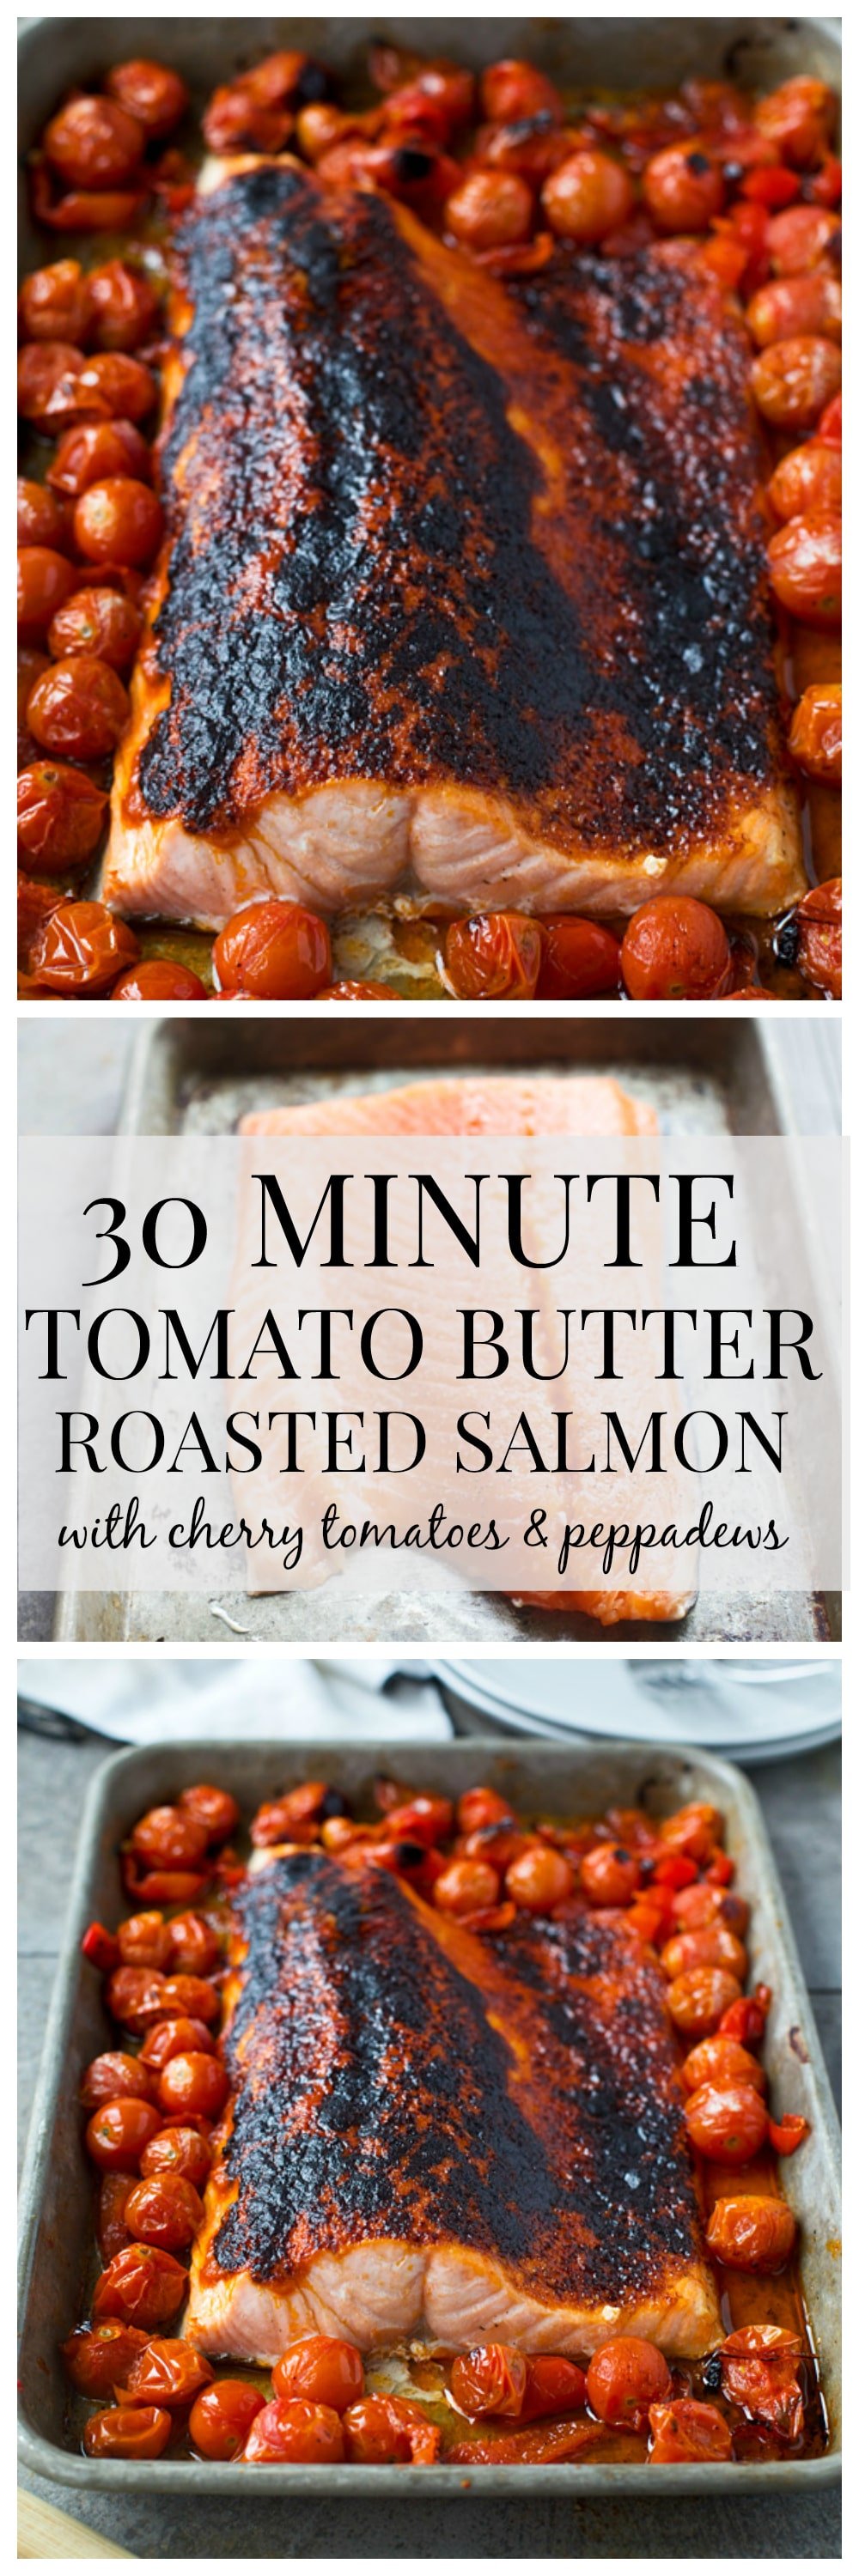 Tomato Butter Roasted Salmon with Cherry Tomatoes and Peppadews - An easy weeknight dinner that comes together in 30 minutes